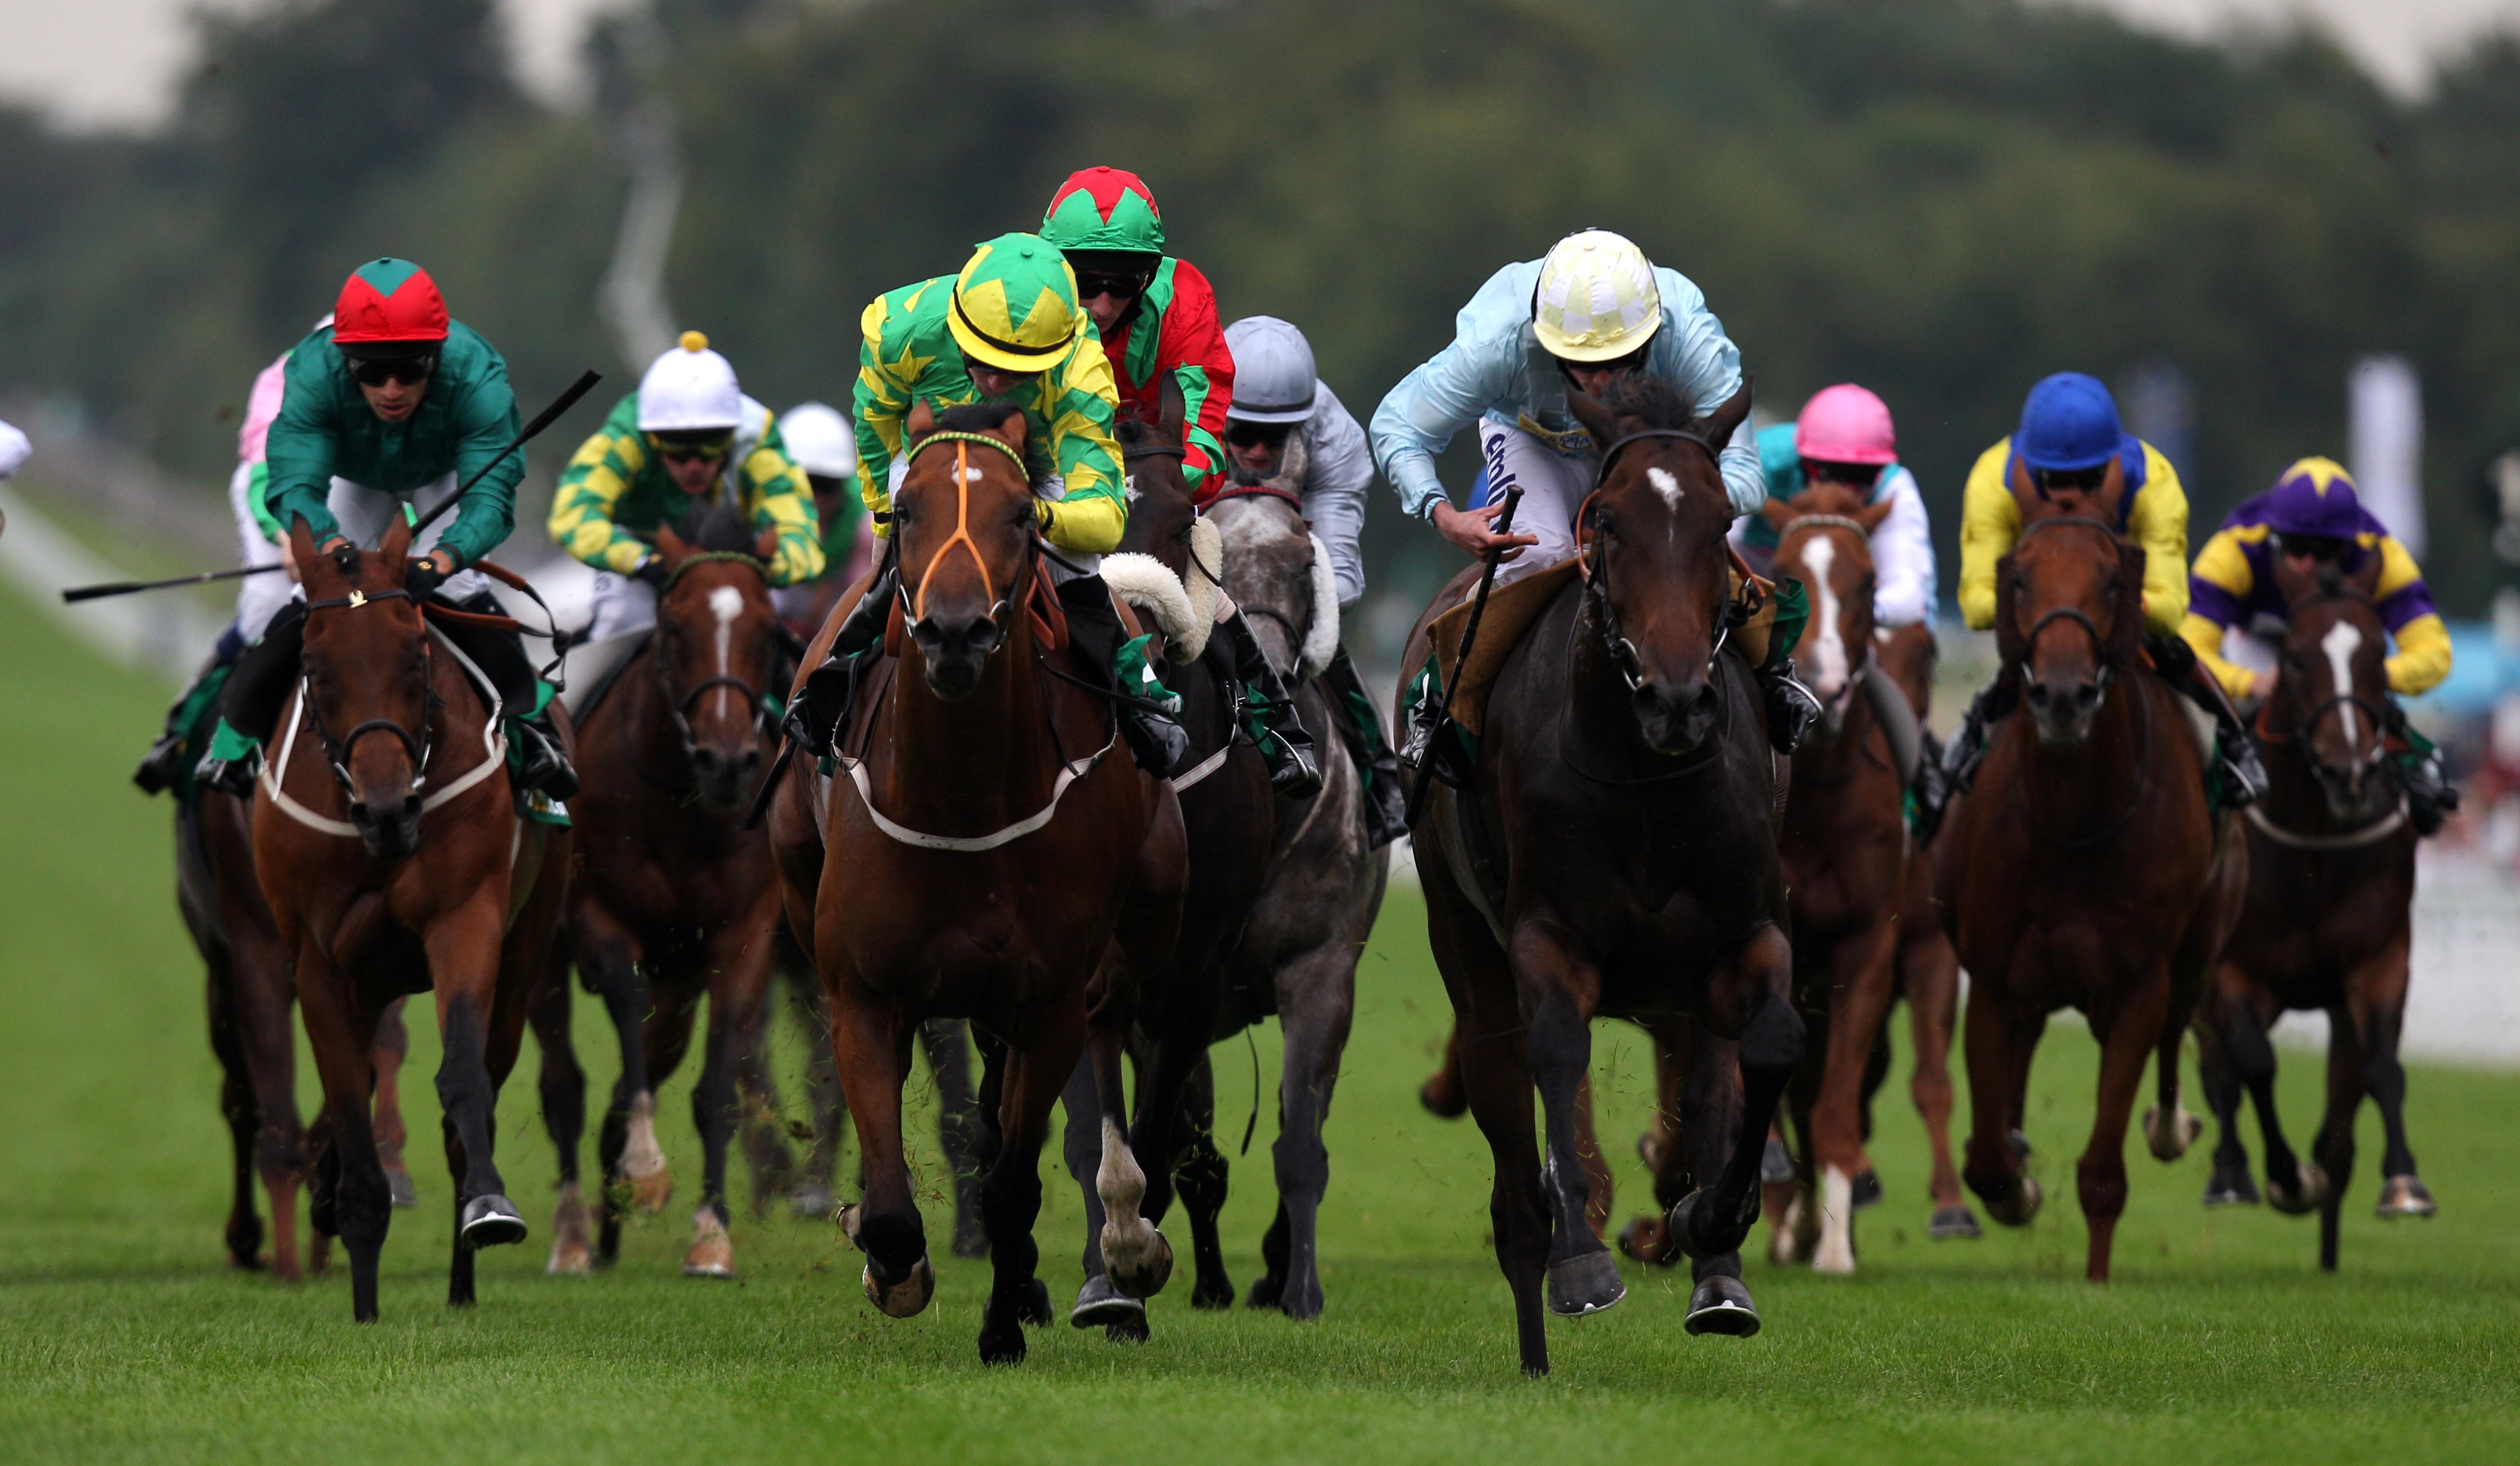 Horse race betting rules new to investing where to start